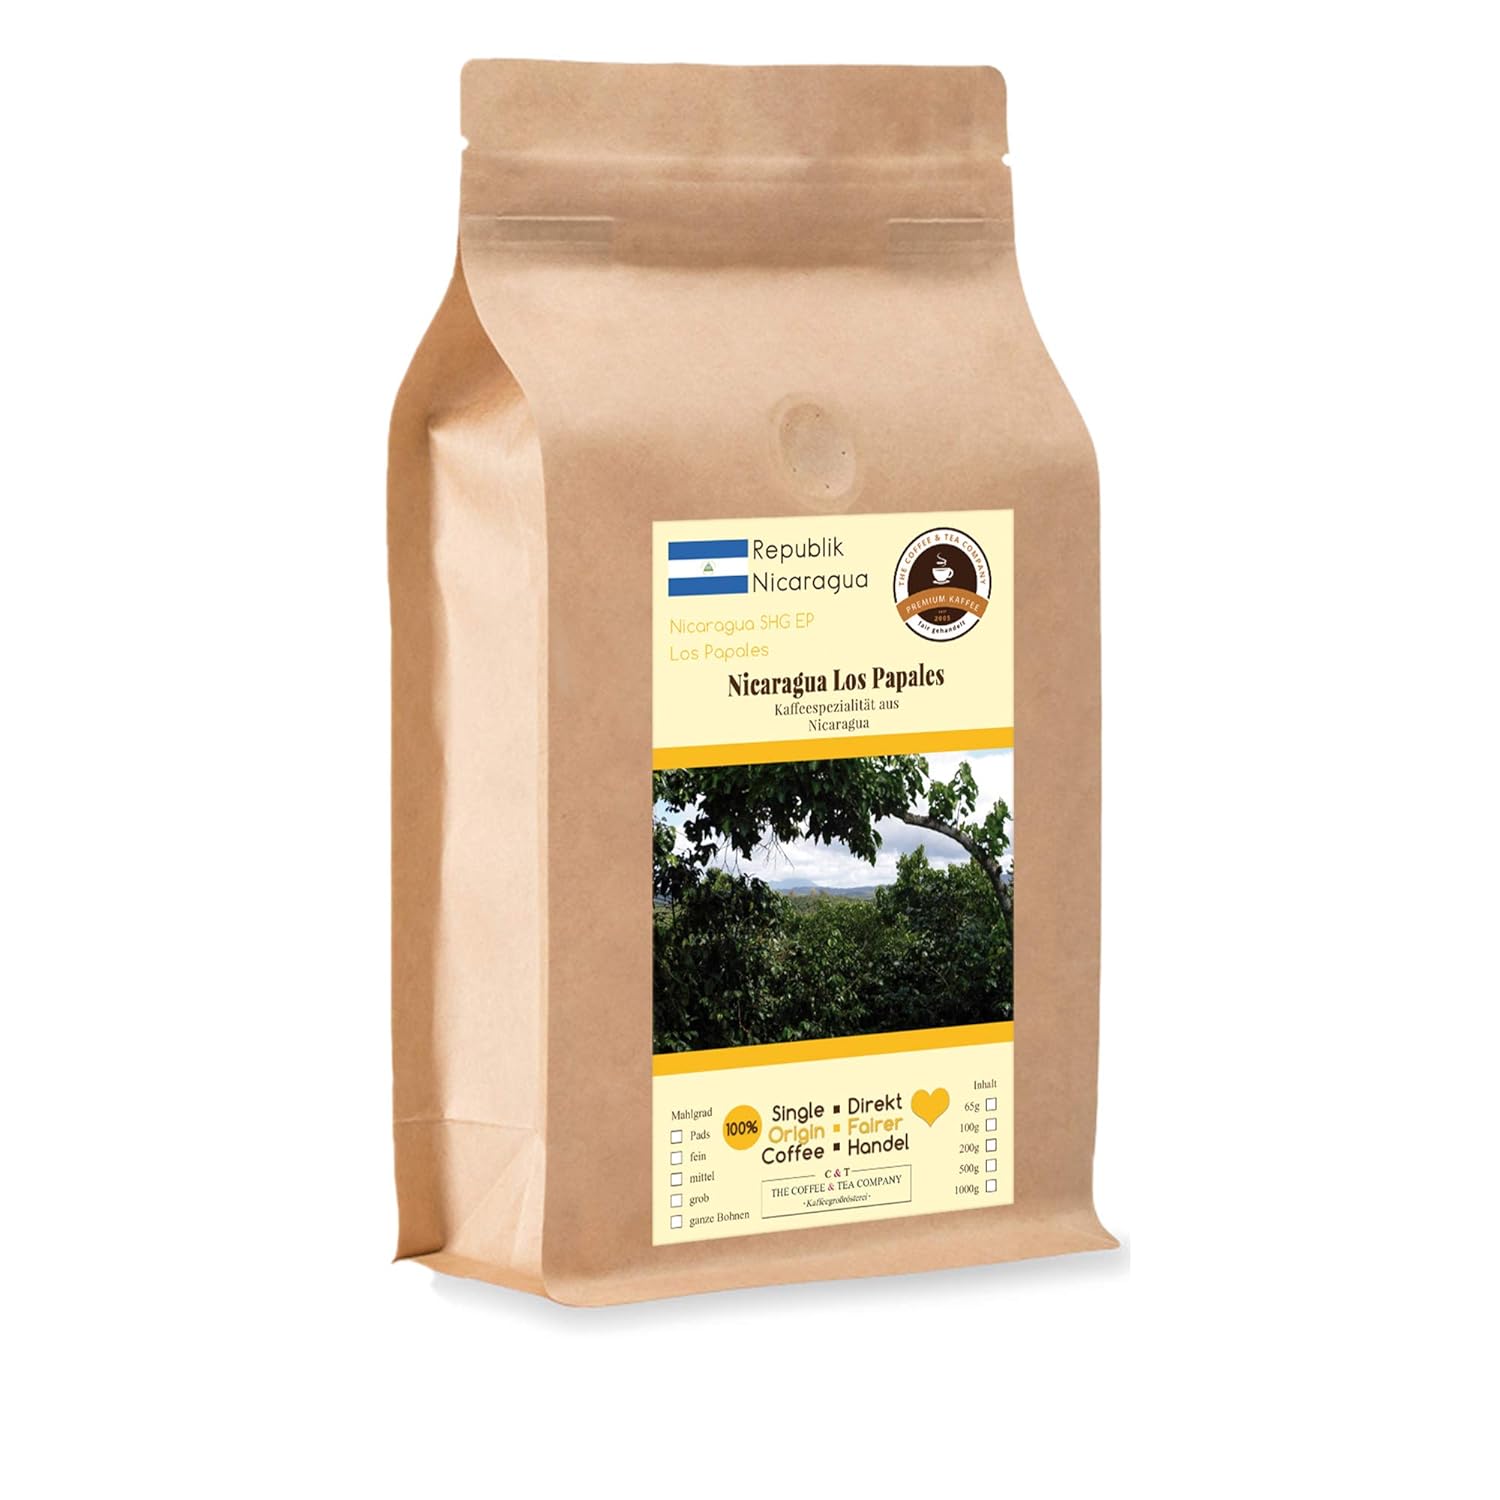 Coffee Globetrotter - Coffee with Heart - Nicaragua Los Papales - 200 g Whole Bean - for Fully Automatic Coffee - Top Coffee Fair Trade Supports Social Projects